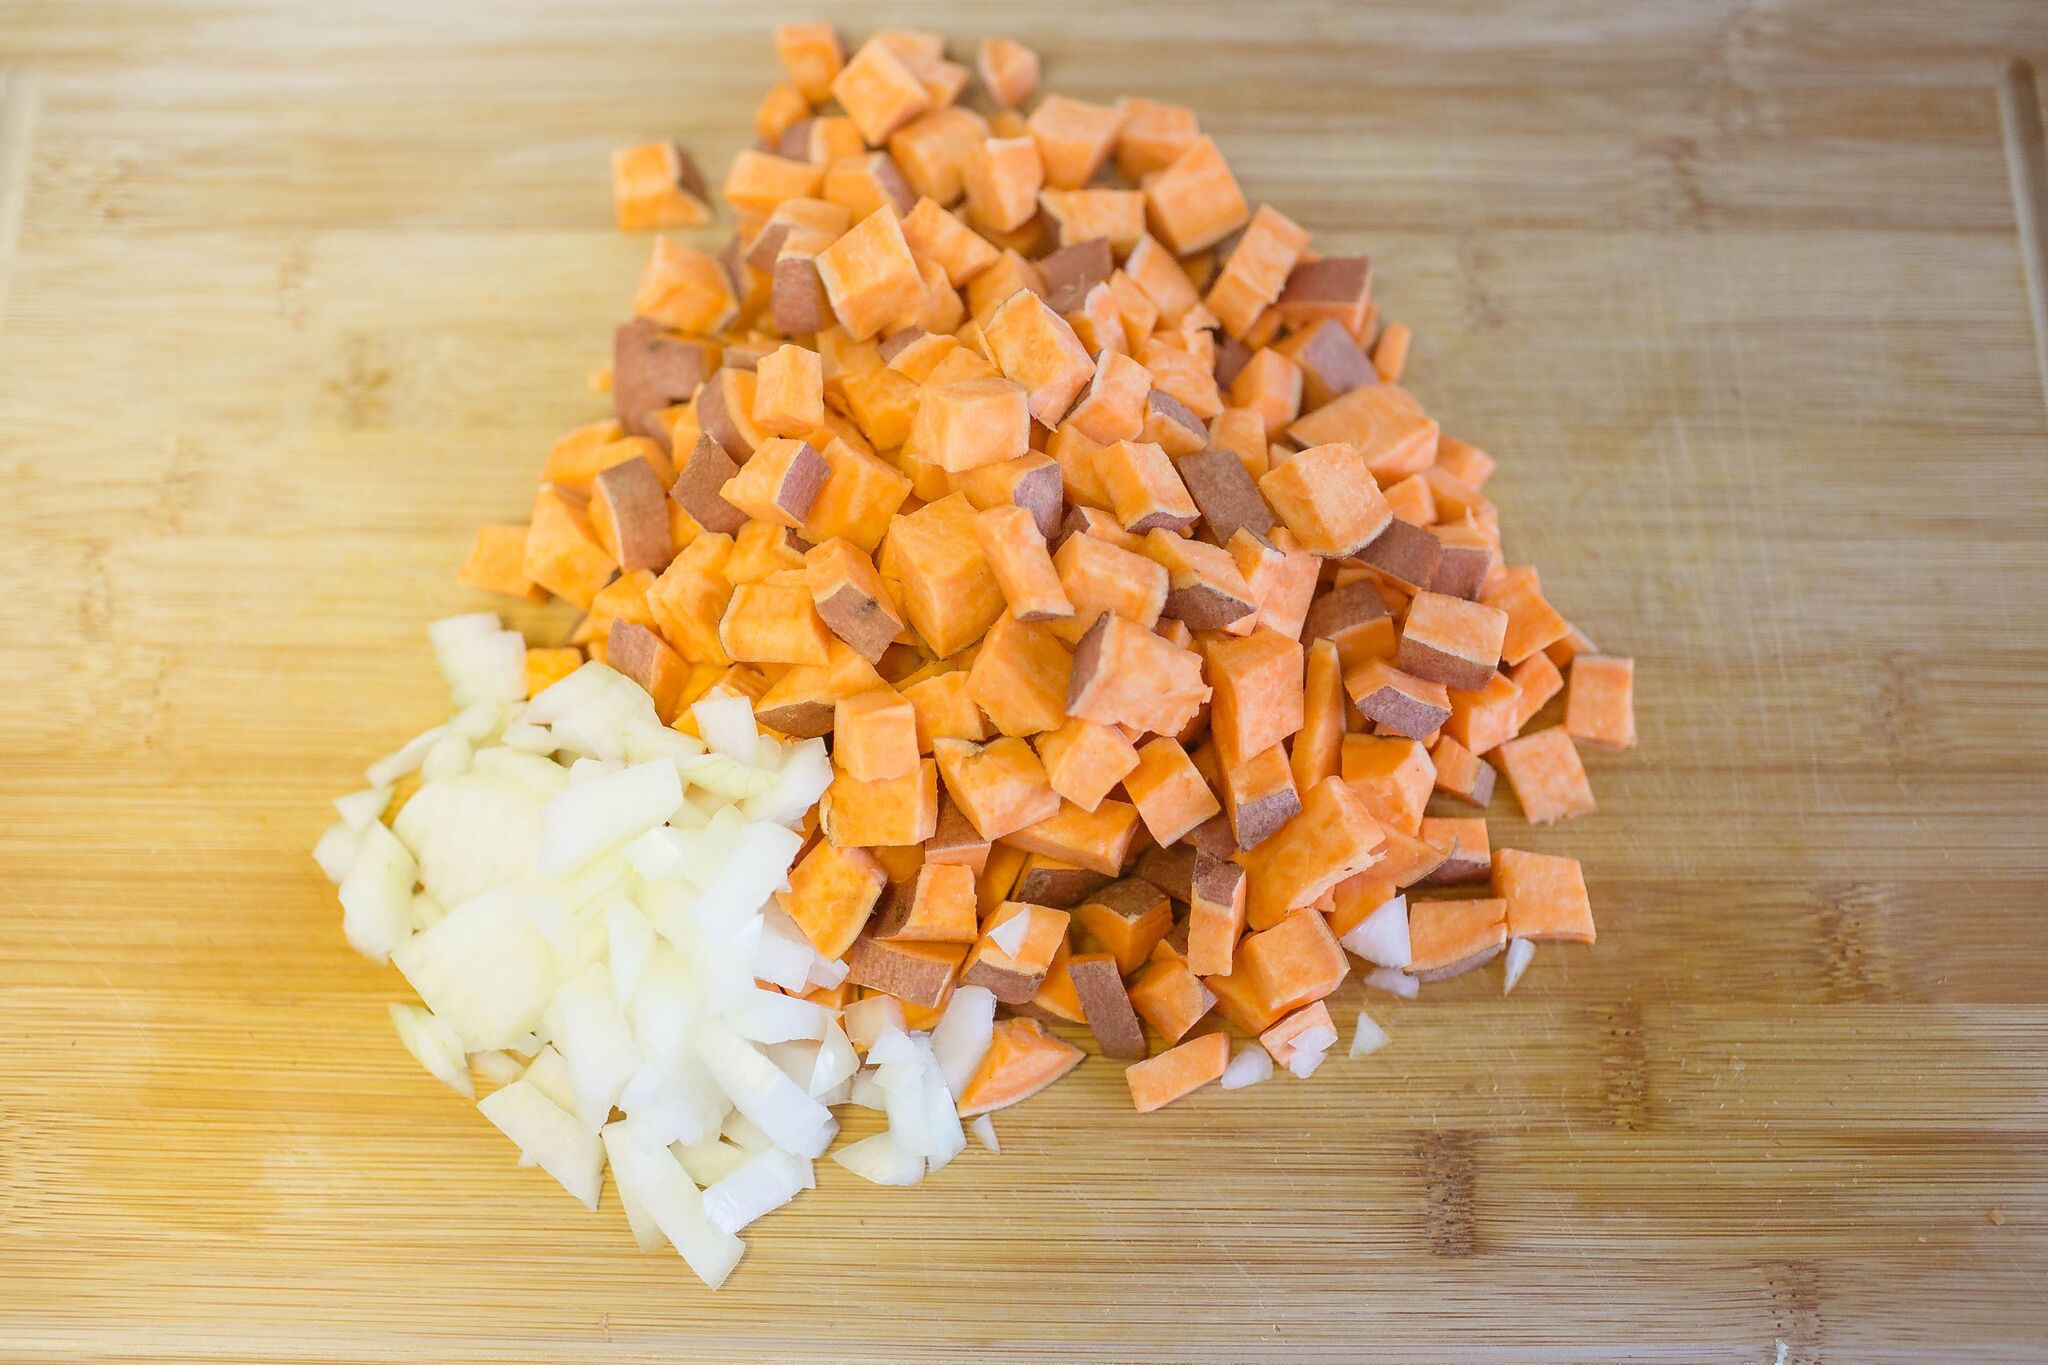 Clean and dice sweet potato, then dice onion and set aside.